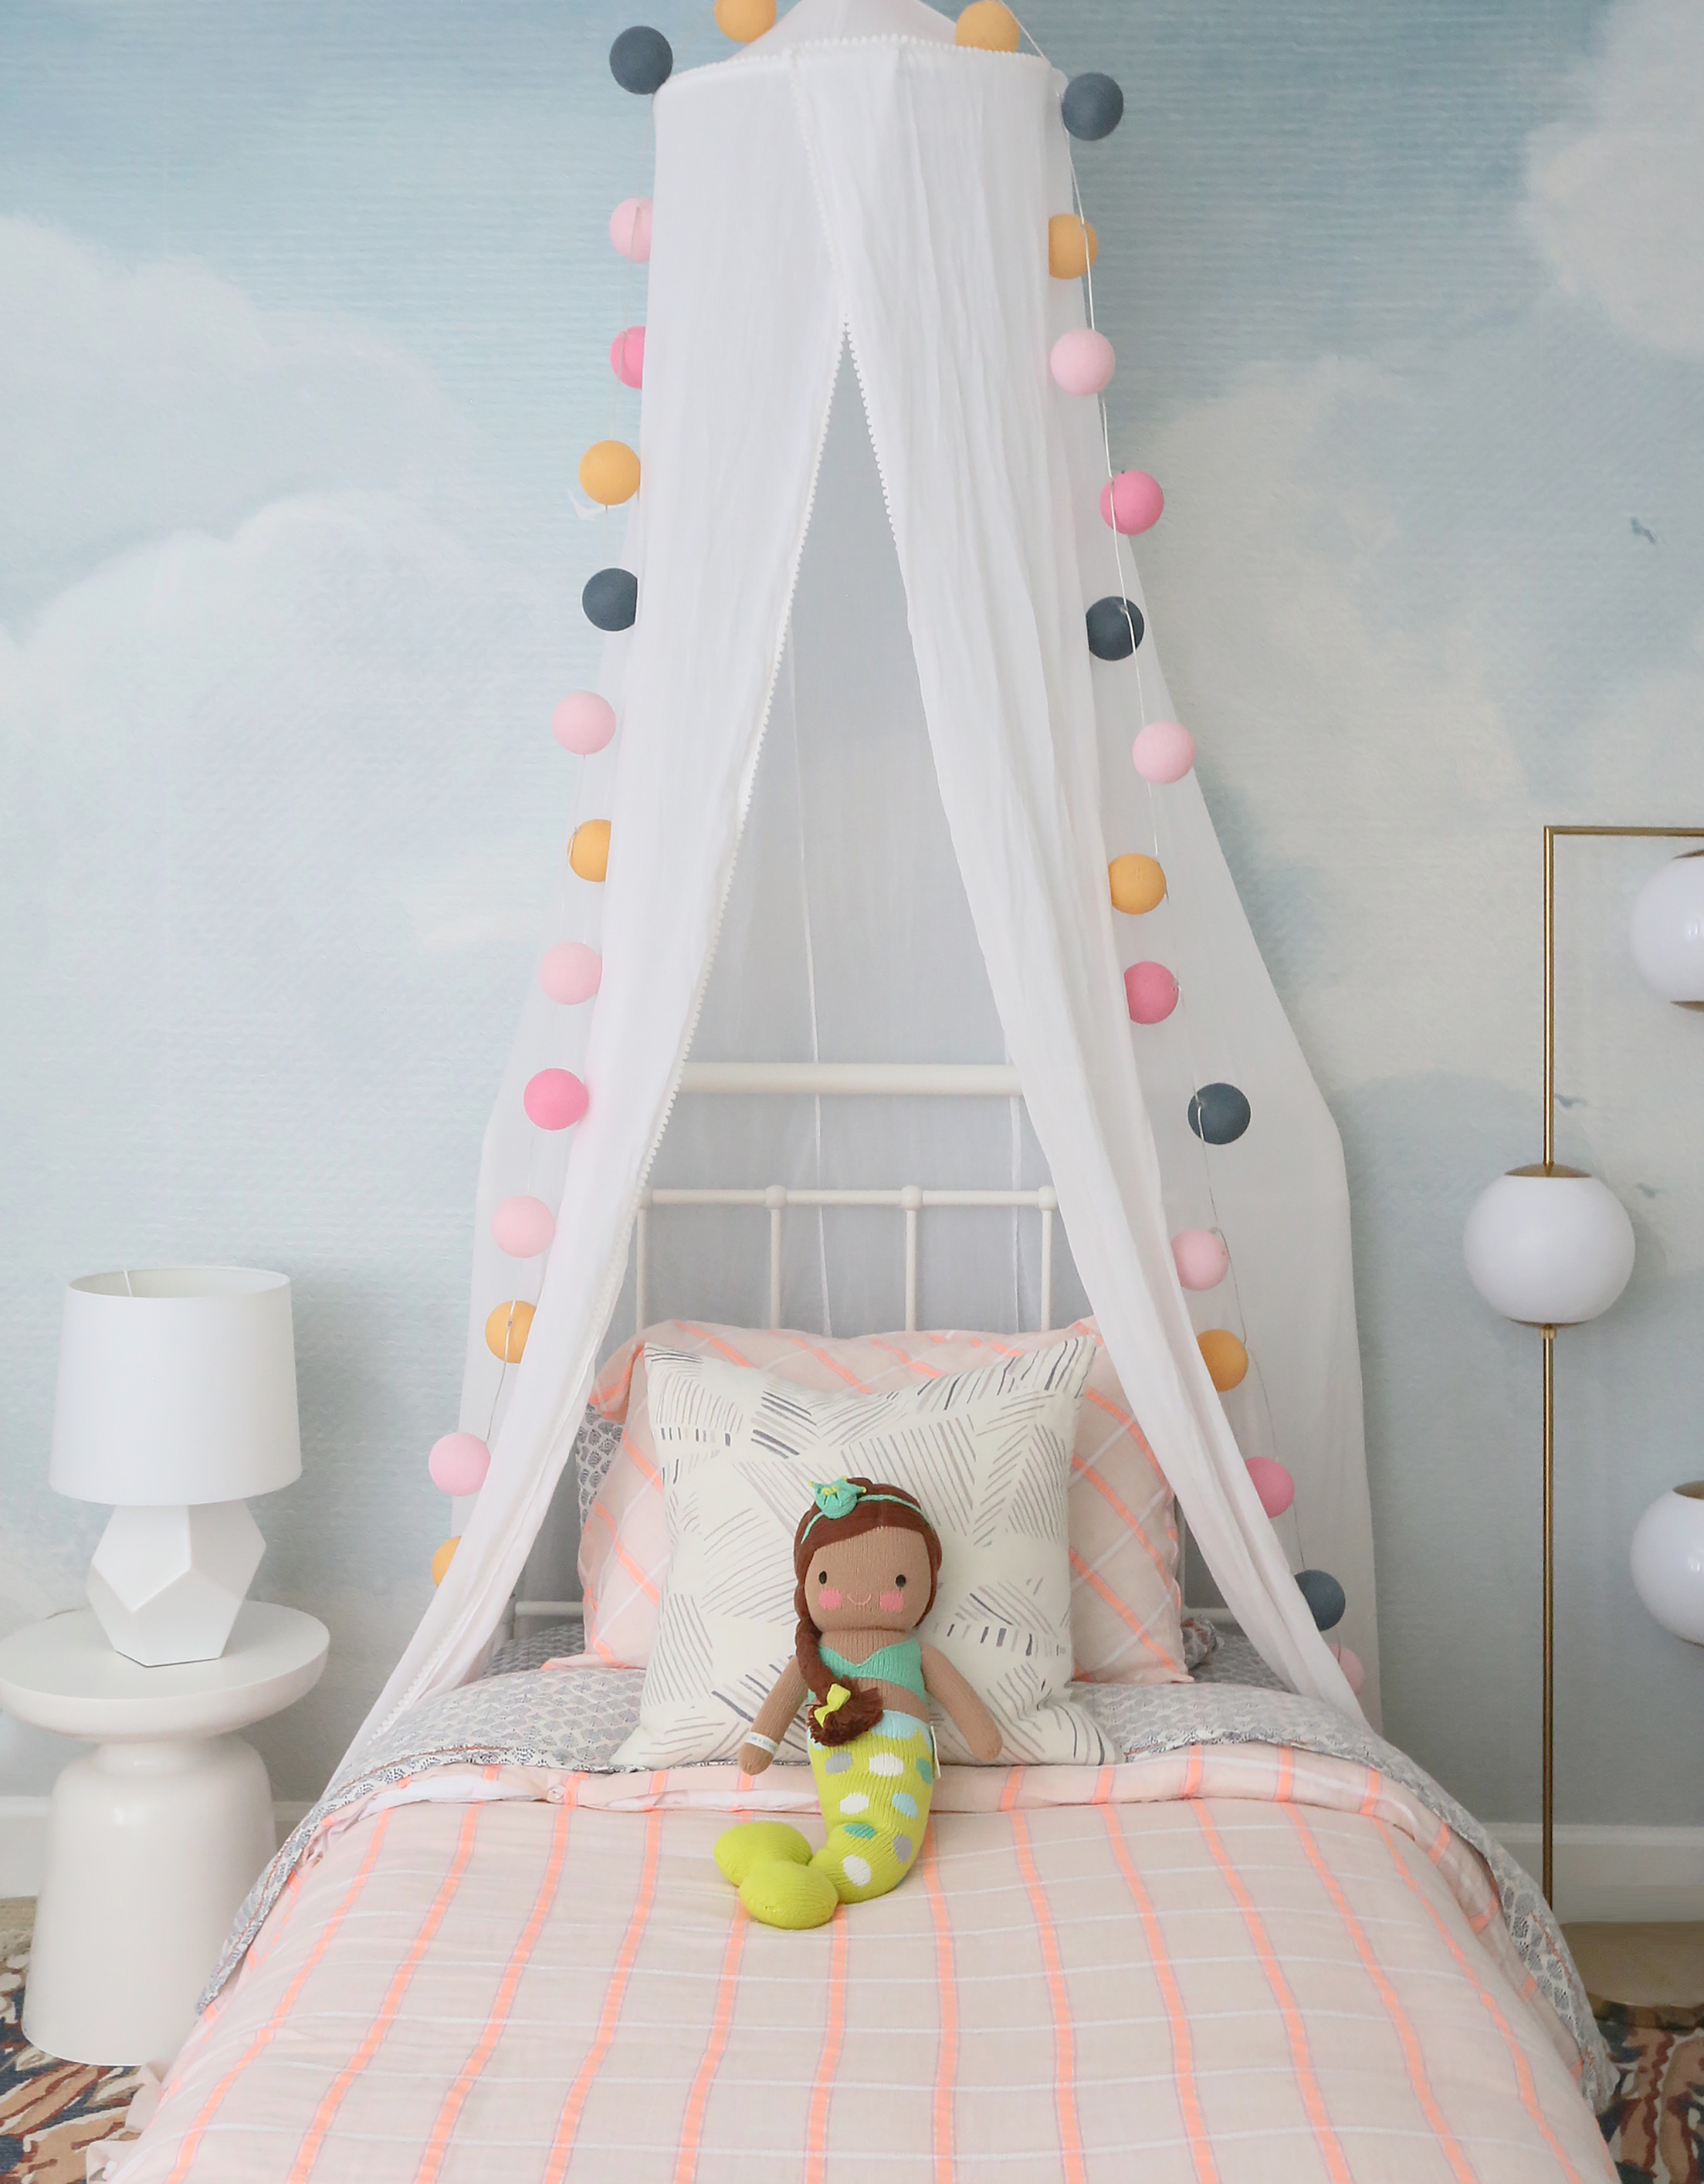 Bed Canopy in Girl's Room with Ball Lights